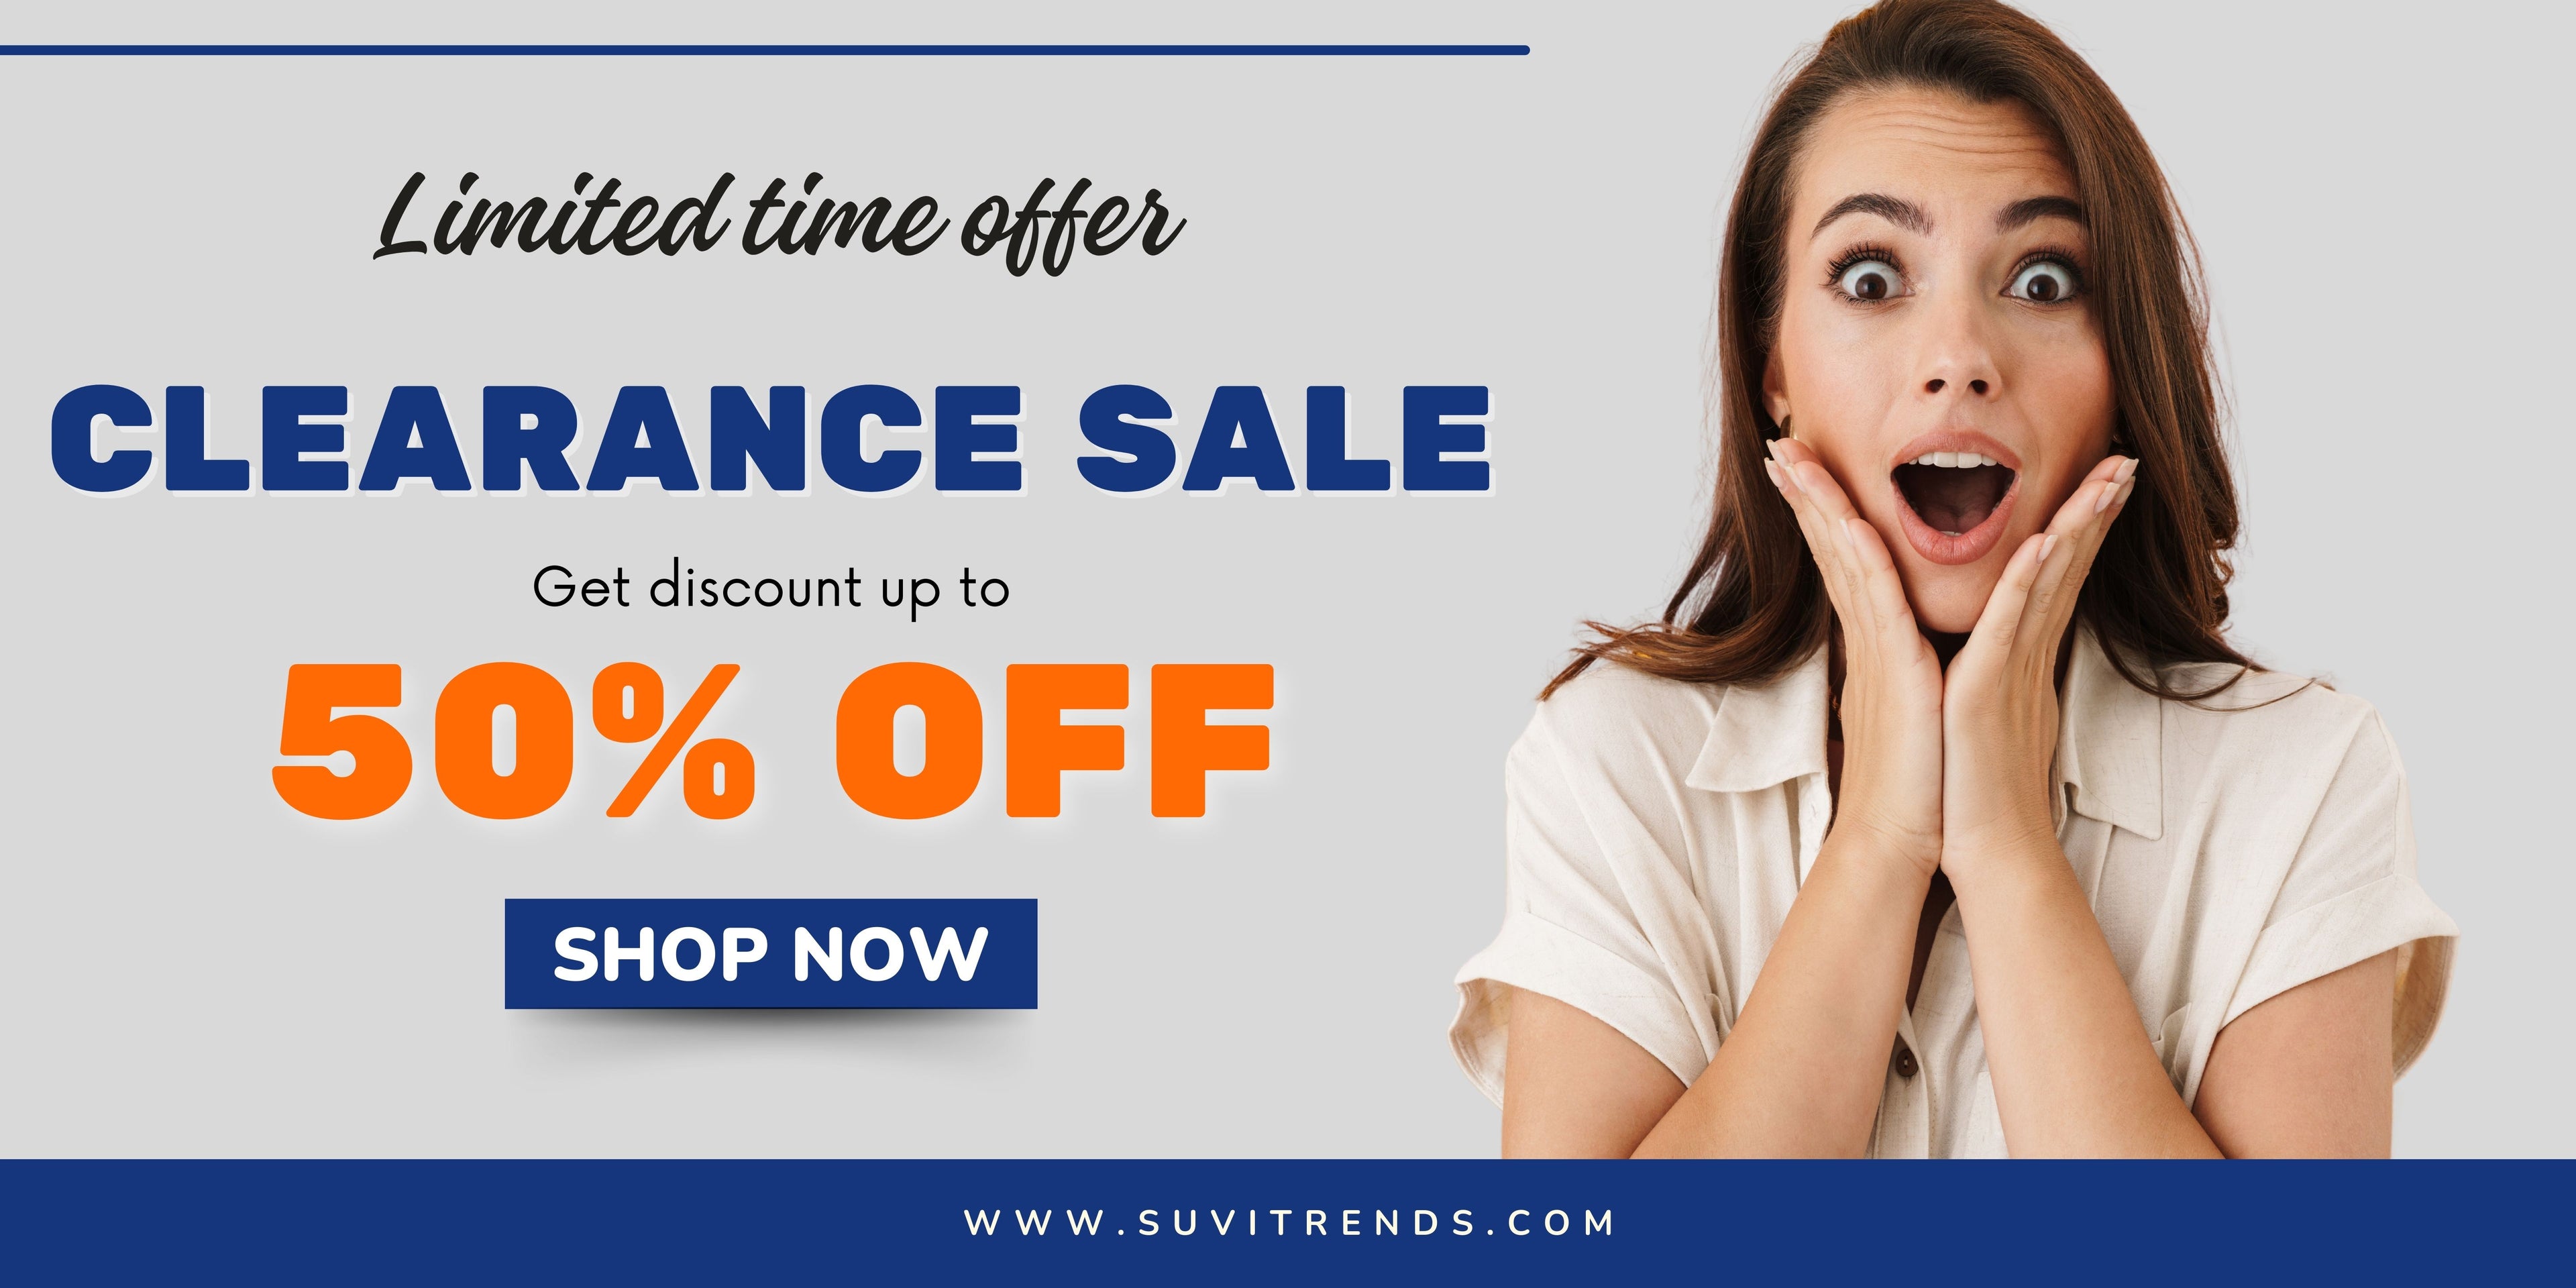 Get upto 50% discount with Suvi Trends Clearance Sale. Limited time offer!